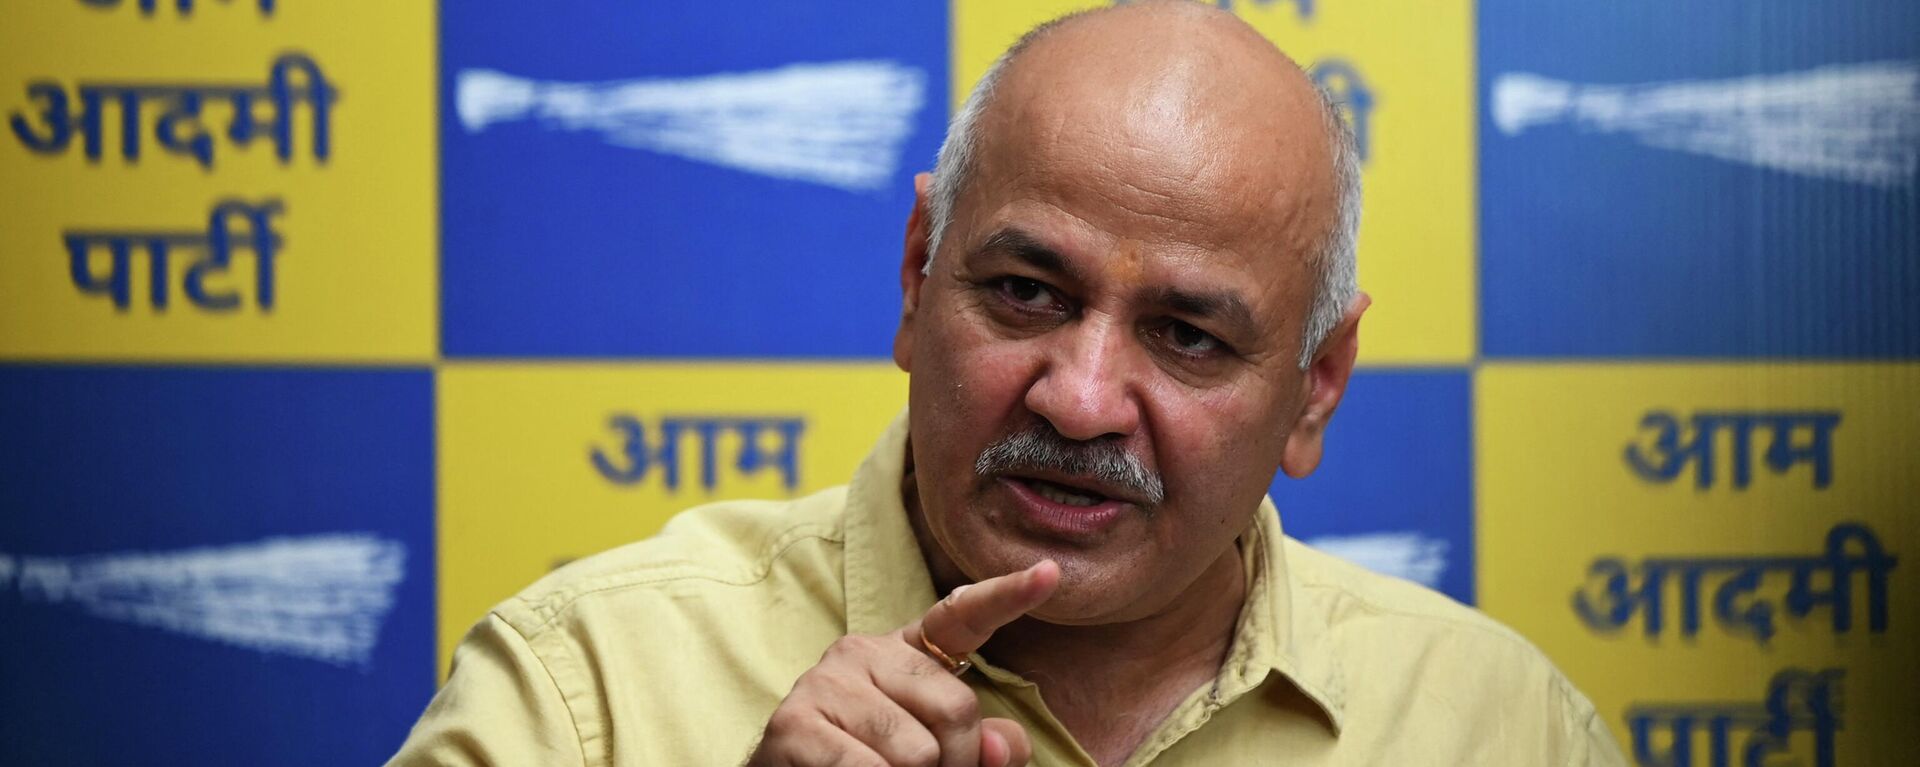 Delhi Deputy Chief Minister Manish Sisodia speaks during a press conference in New Delhi on August 20, 2022, after the Central Bureau of Investigation (CBI) had raided his home in relation to alleged irregularities with the implementation of the Excise Policy 2021-22. - Sputnik International, 1920, 22.08.2022